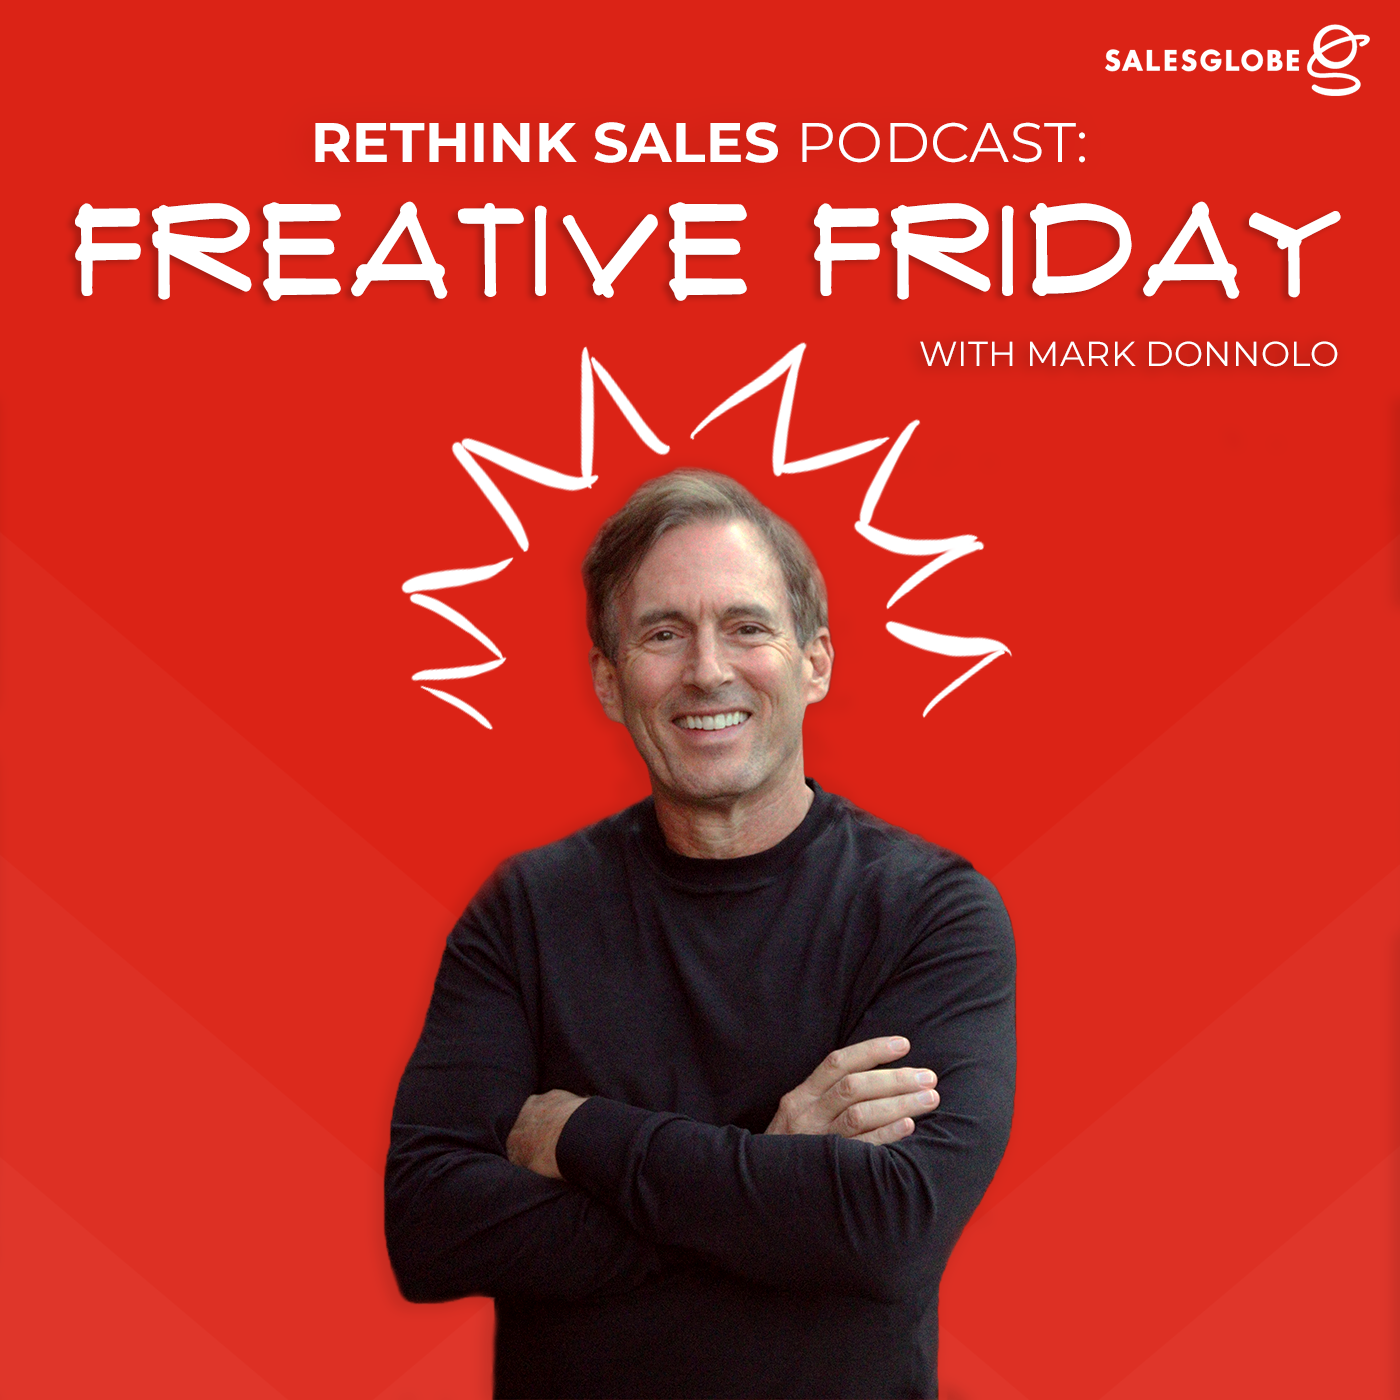 71: Freative Friday - What Can the Final Four Teach Us? Selling More in an Uncertain Economy